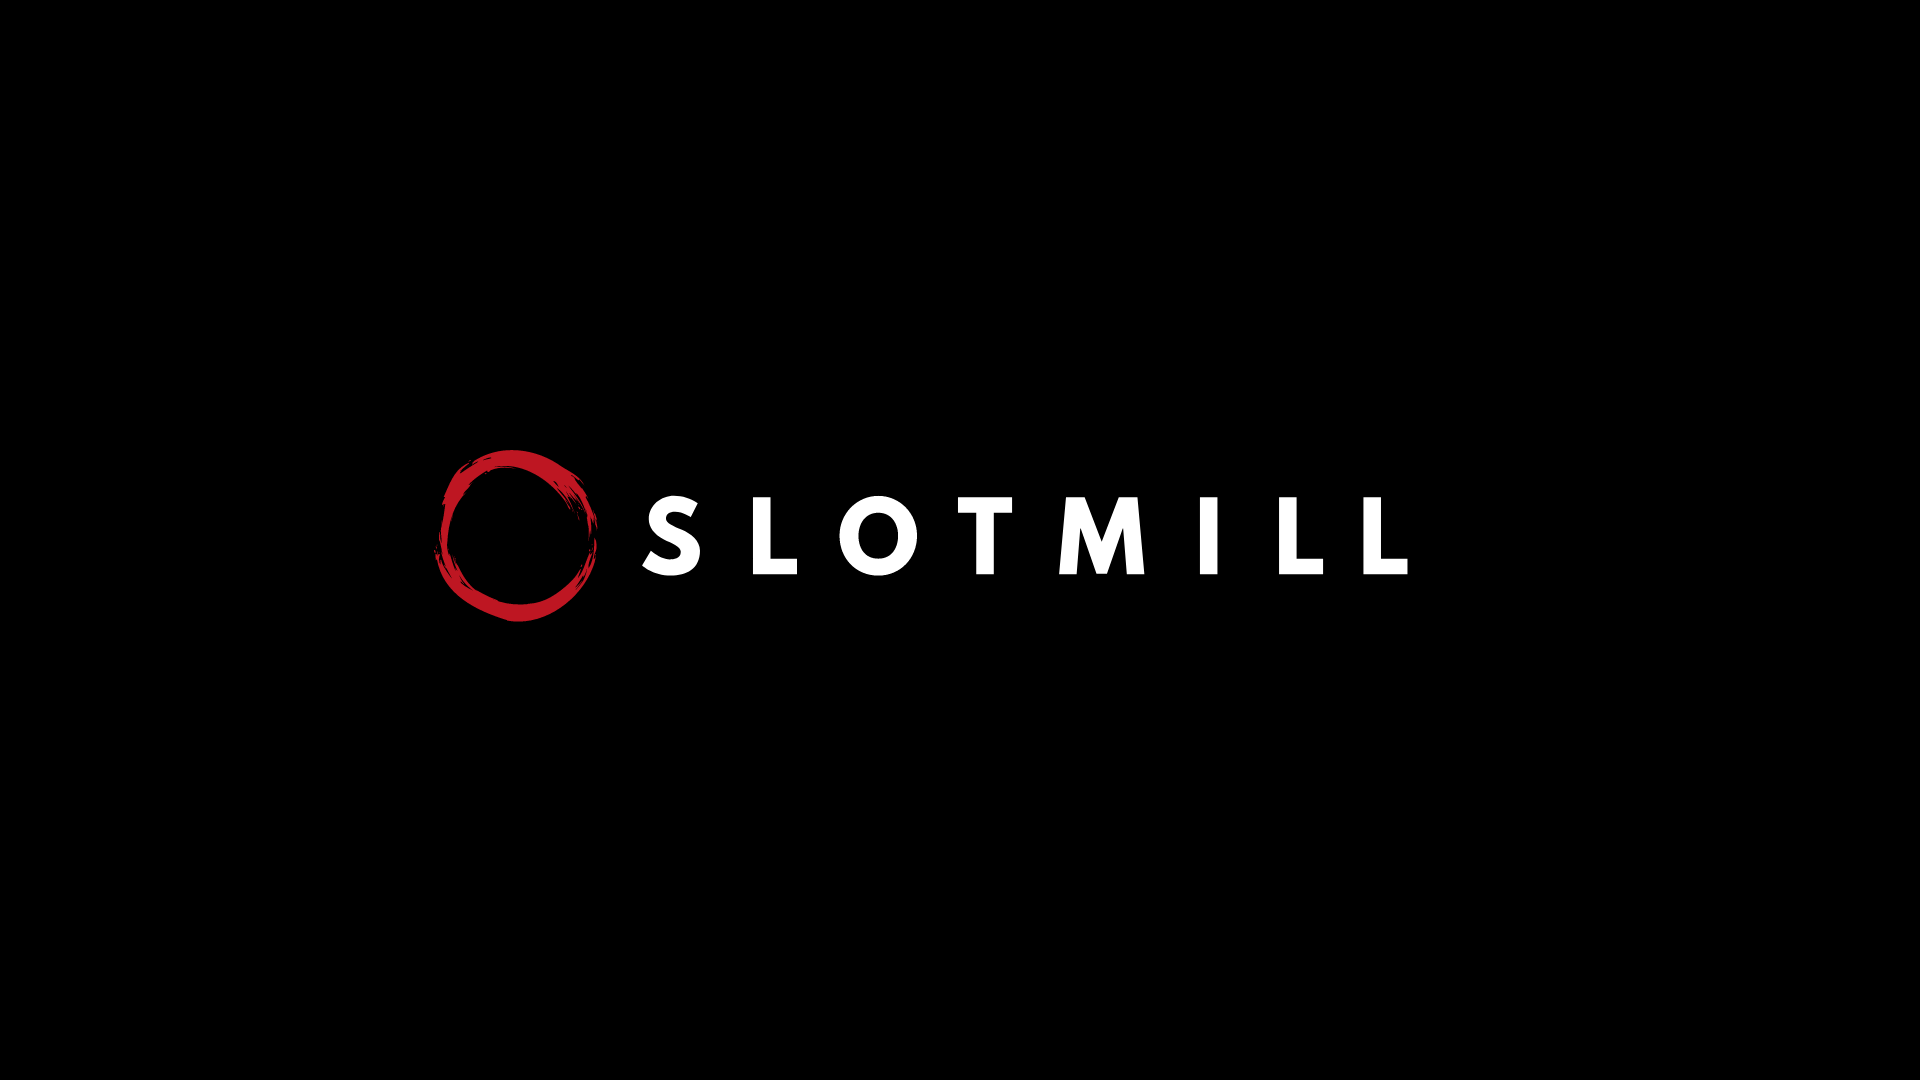 Slotmill seals agreement with Betsson